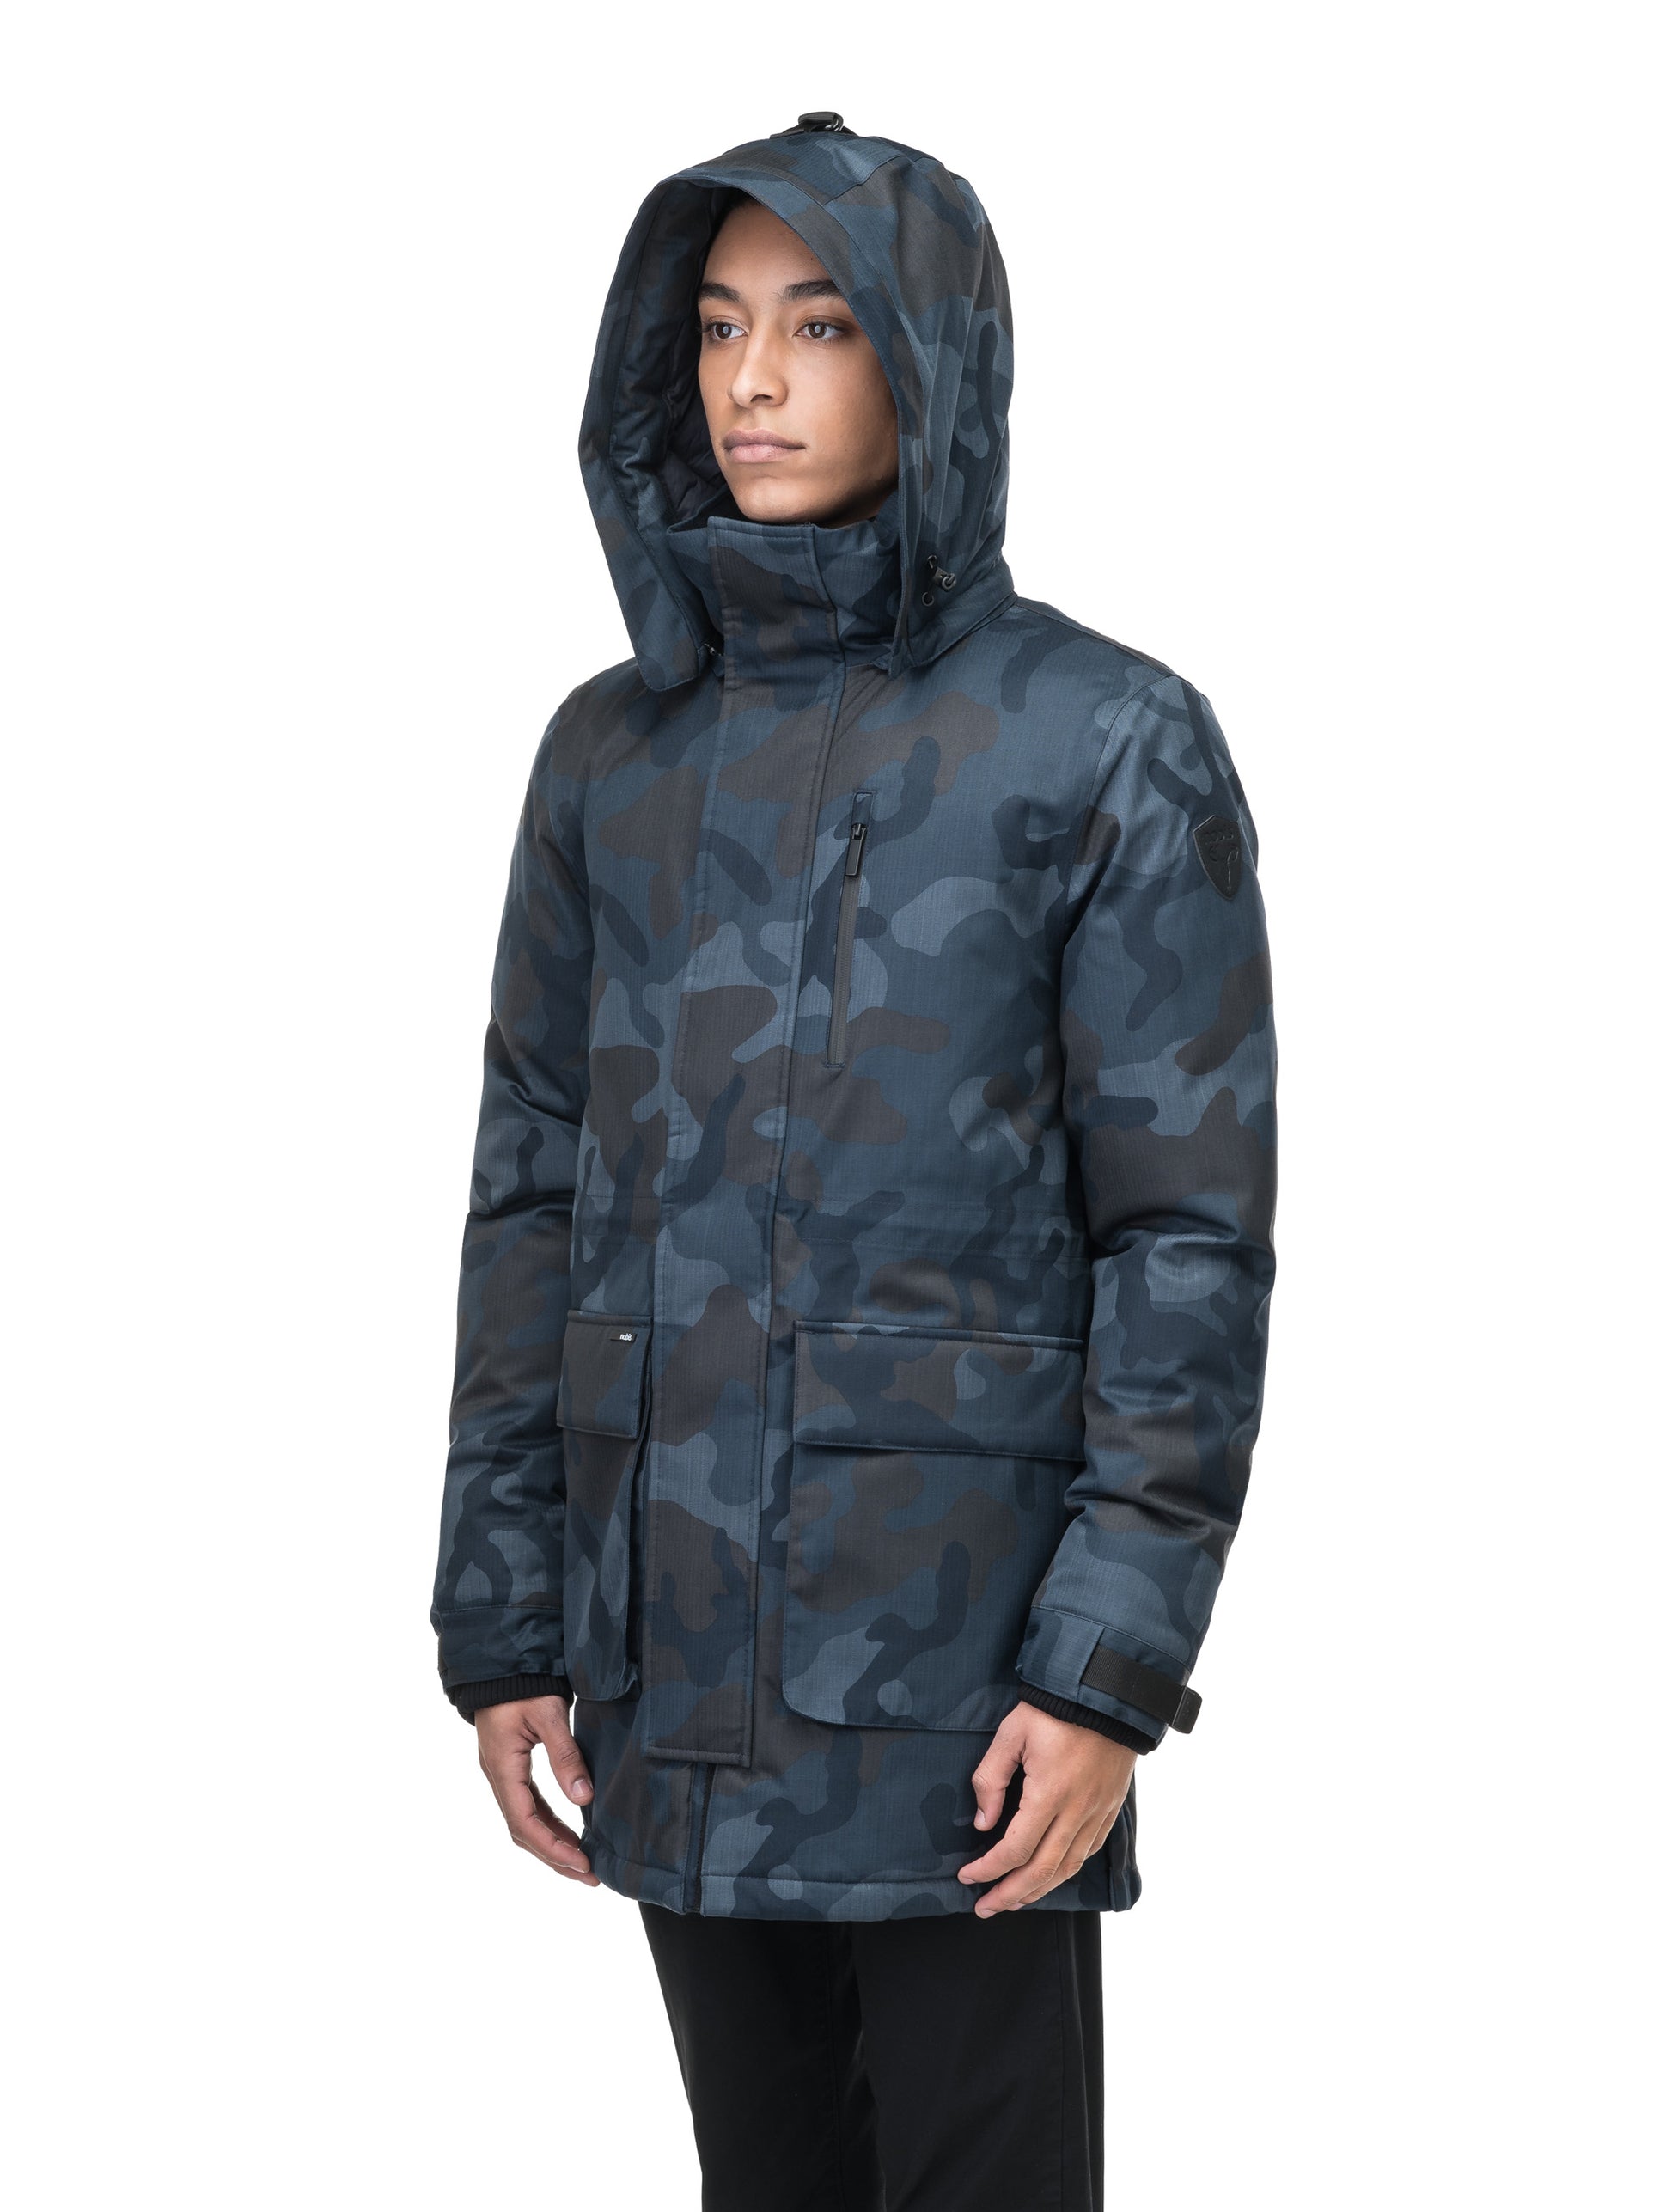 Mid weight men's down filled parka with two patch pockets at the hip and snap closure side vents in Navy Camo